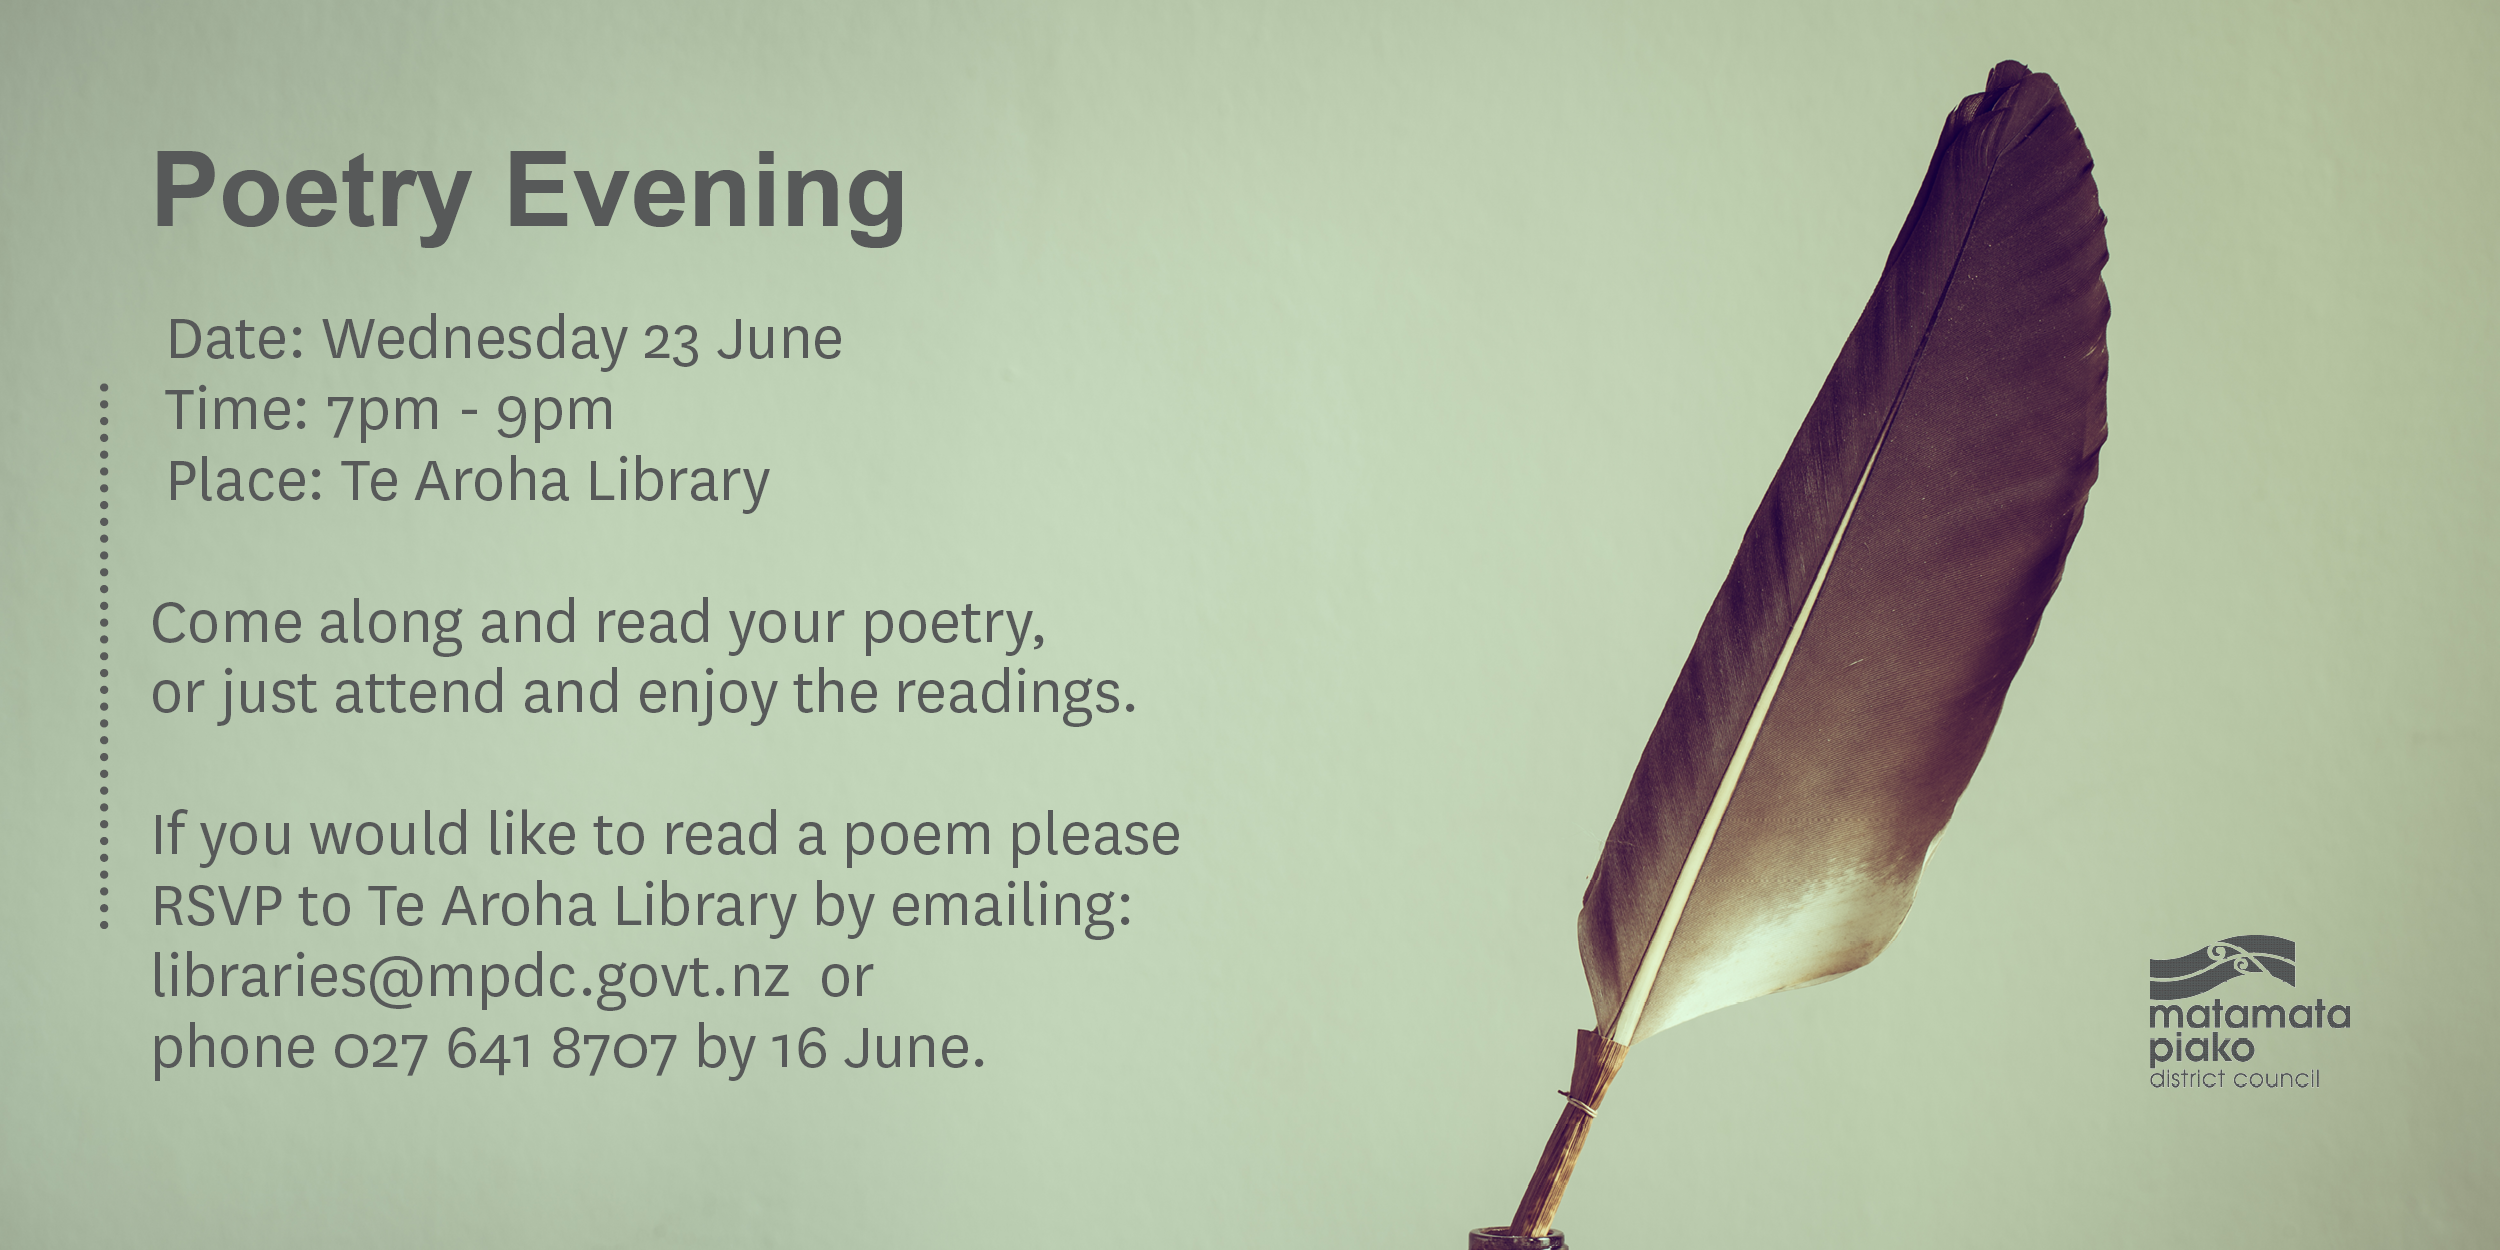 Poetry Evening - Te Aroha Library - Wednesday 23 June at 7pm 